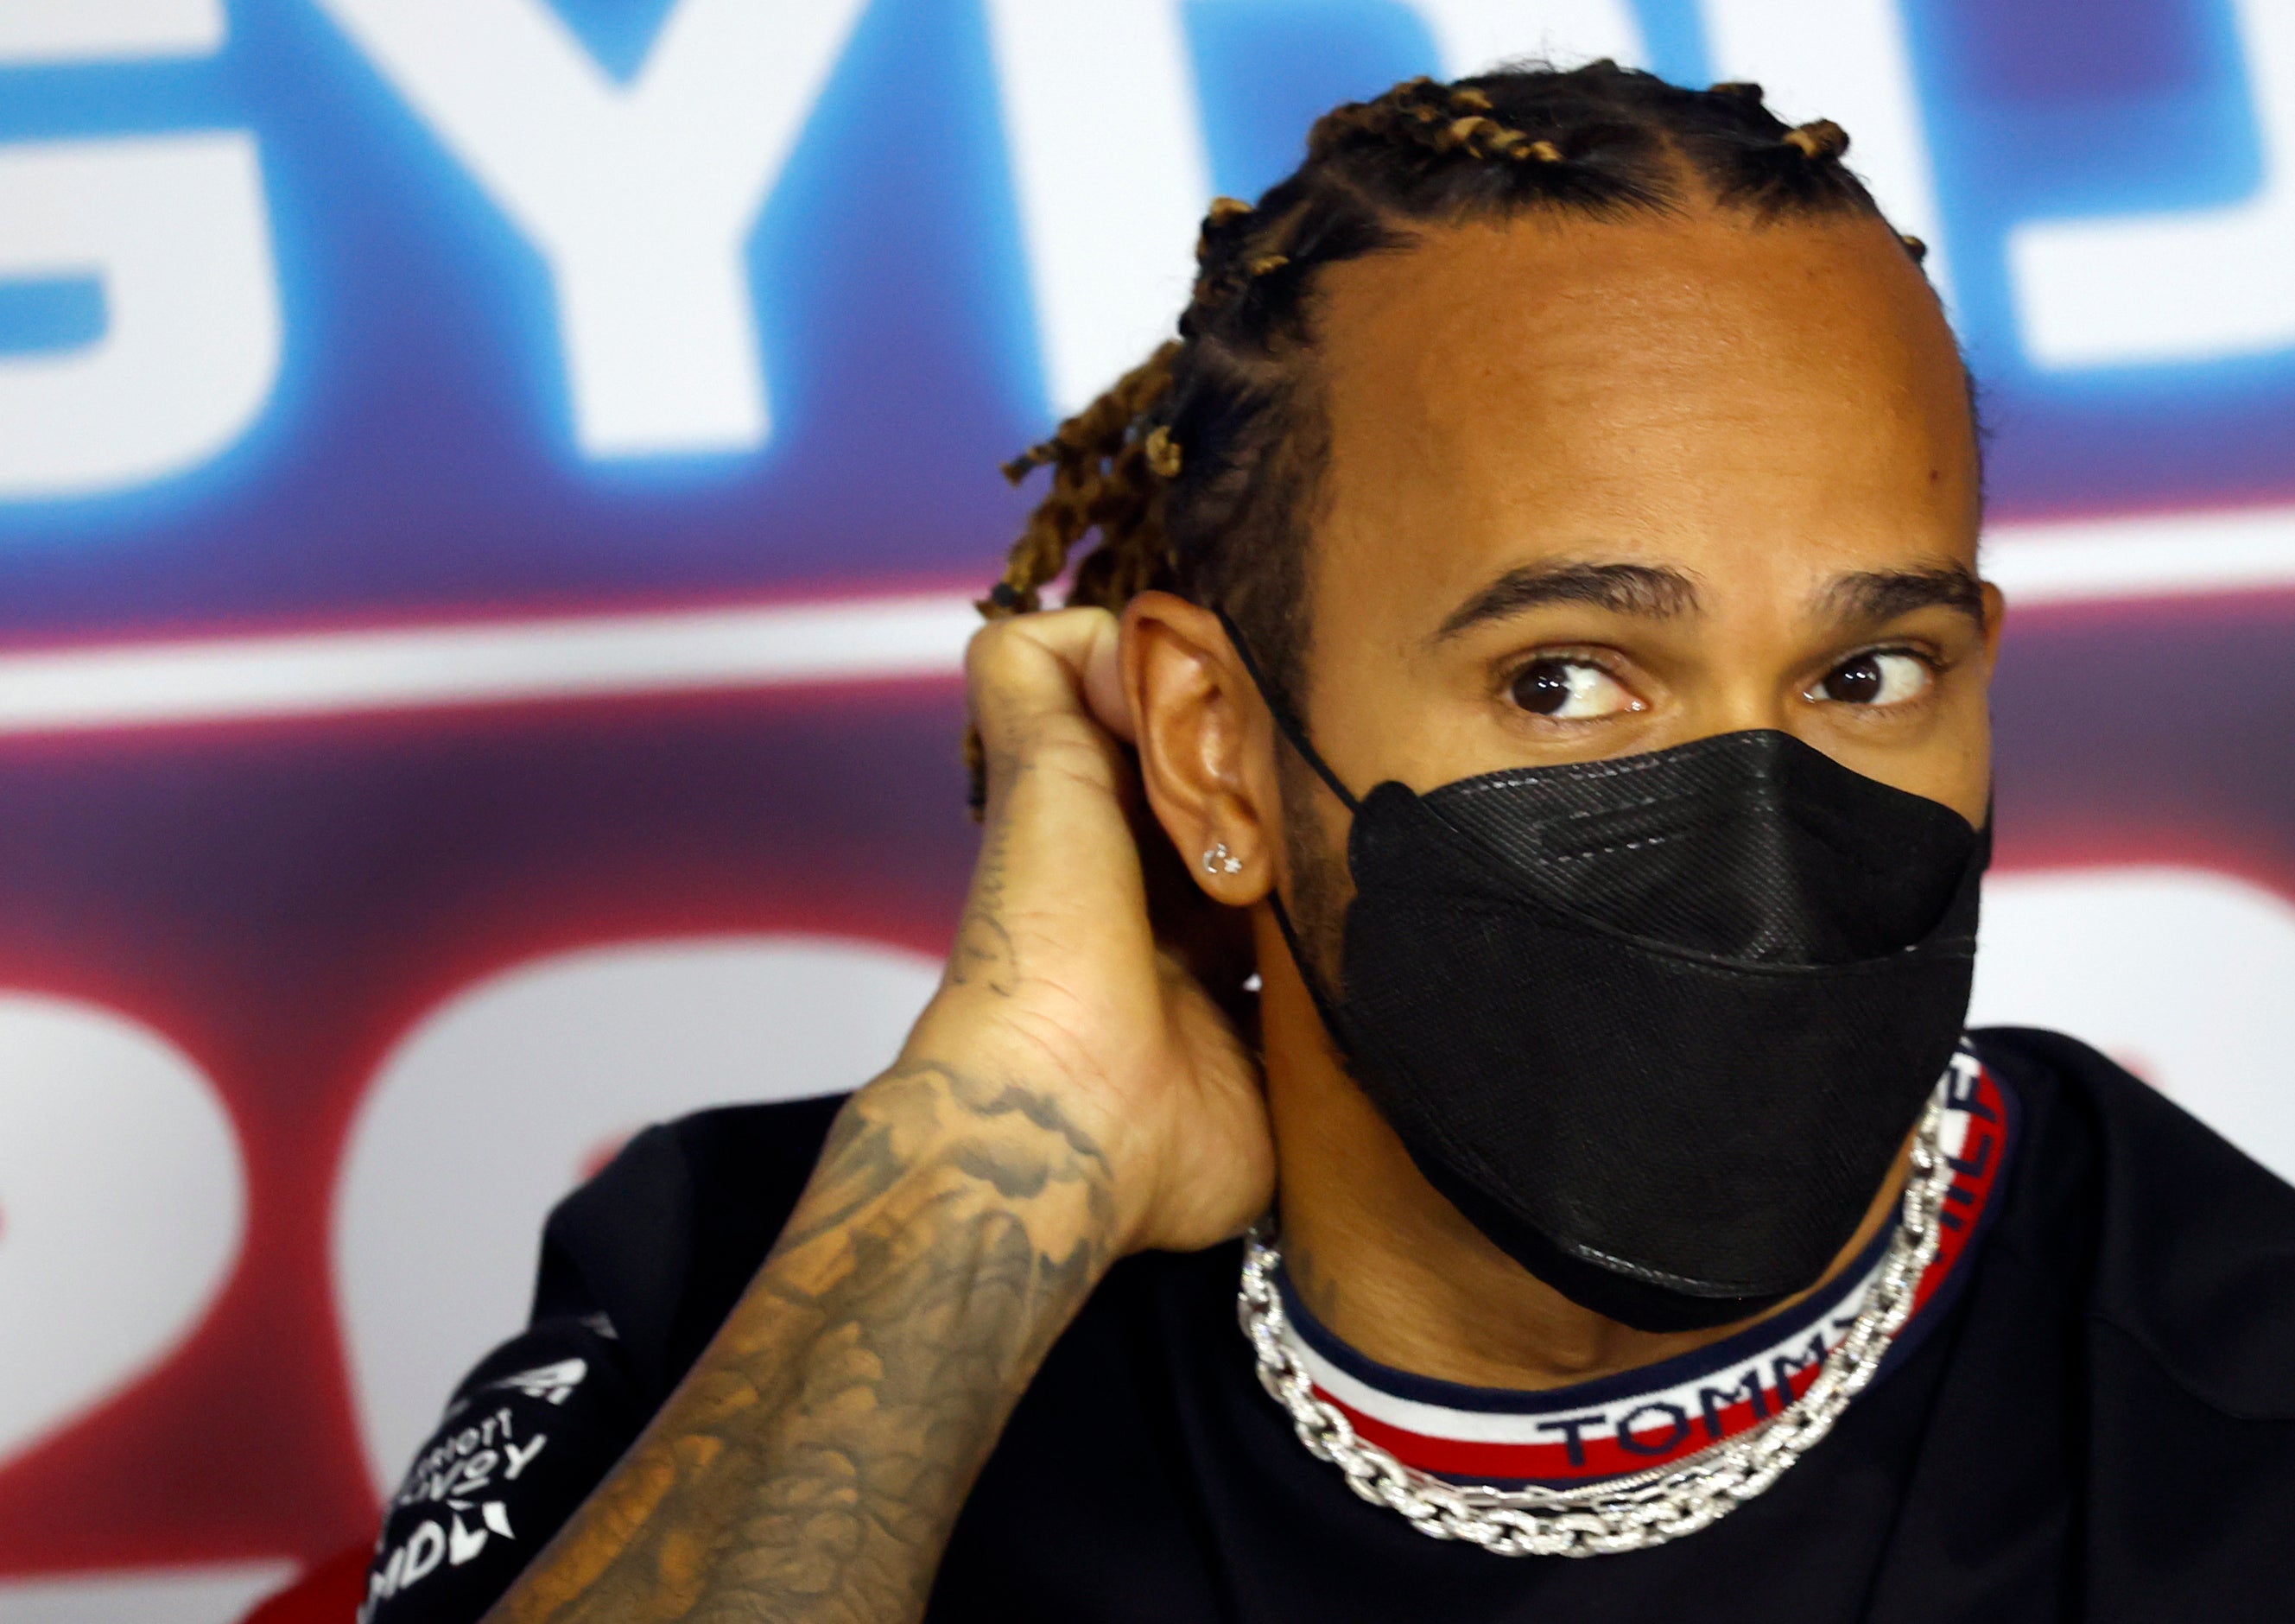 Lewis Hamilton believes he may be suffering from long Covid (Florion Goga/AP)